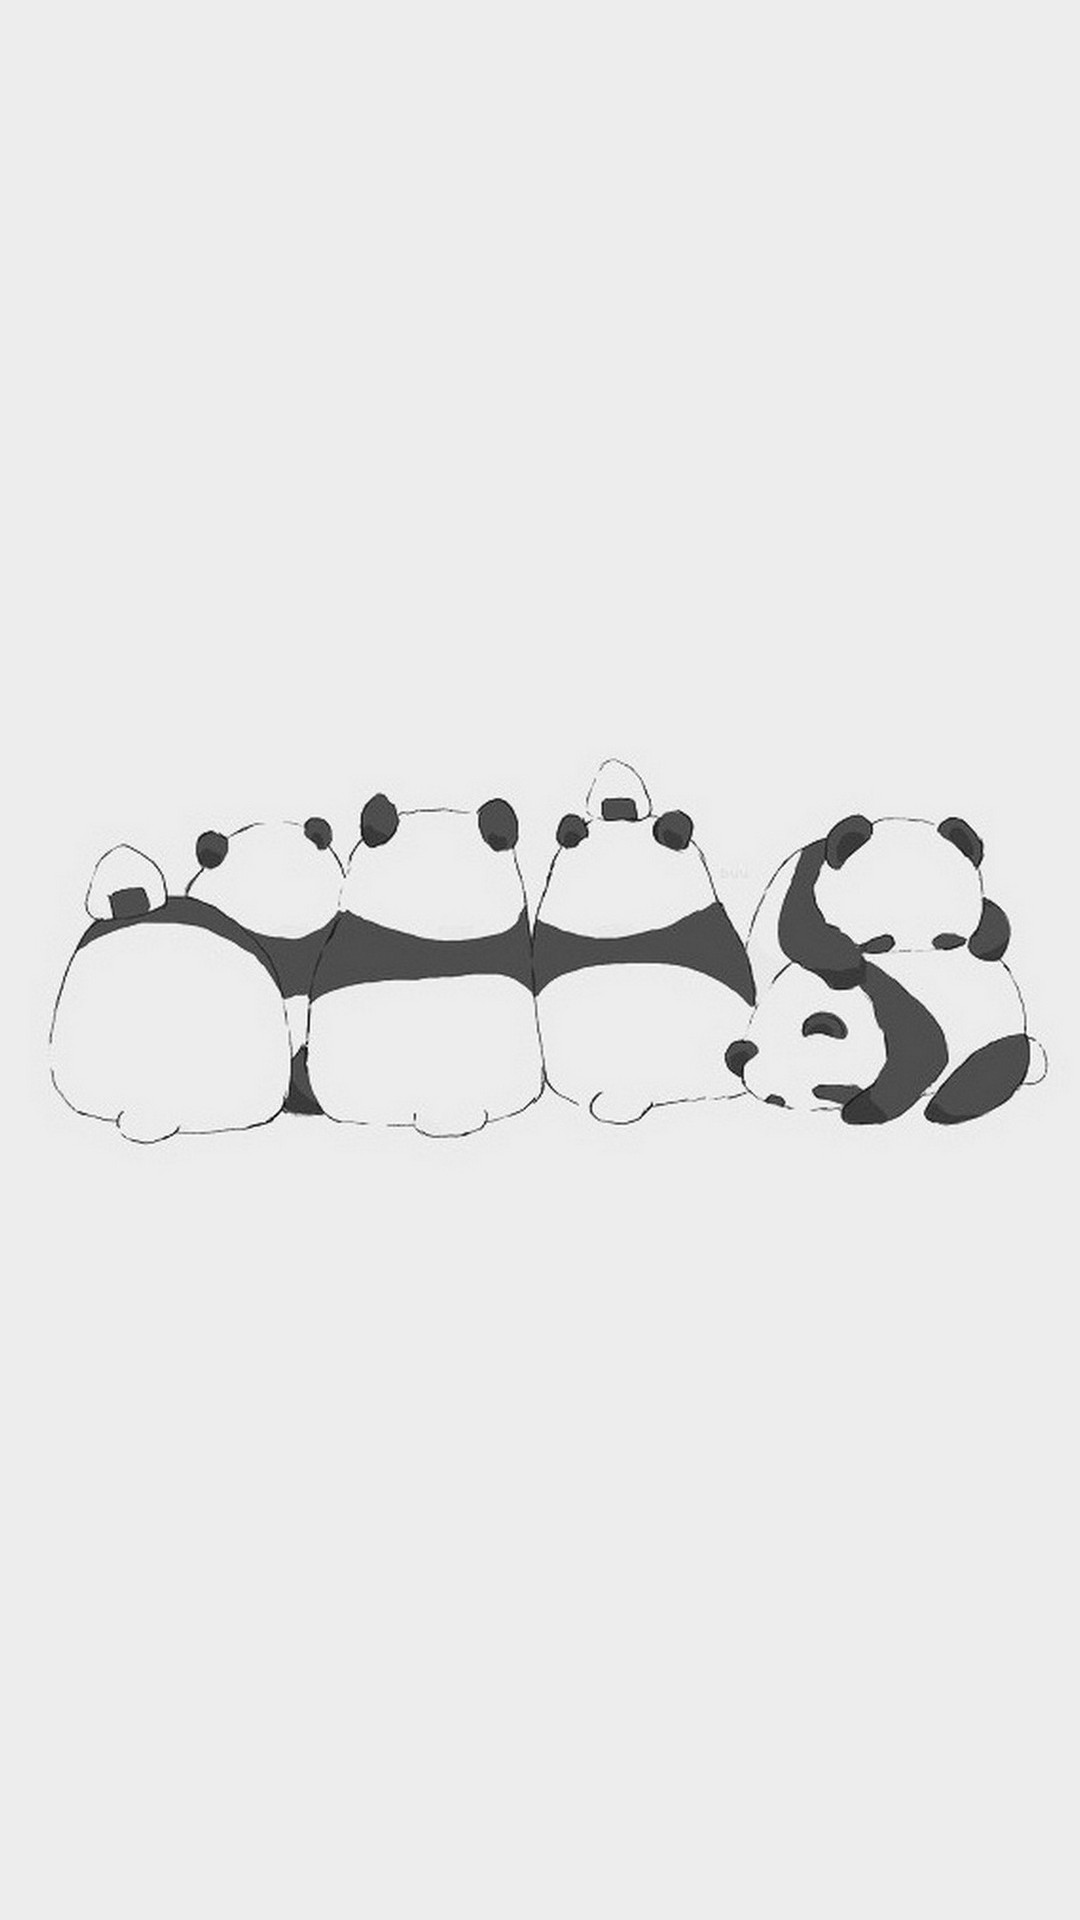 Panda Cute Wallpaper For Android with HD resolution 1080x1920